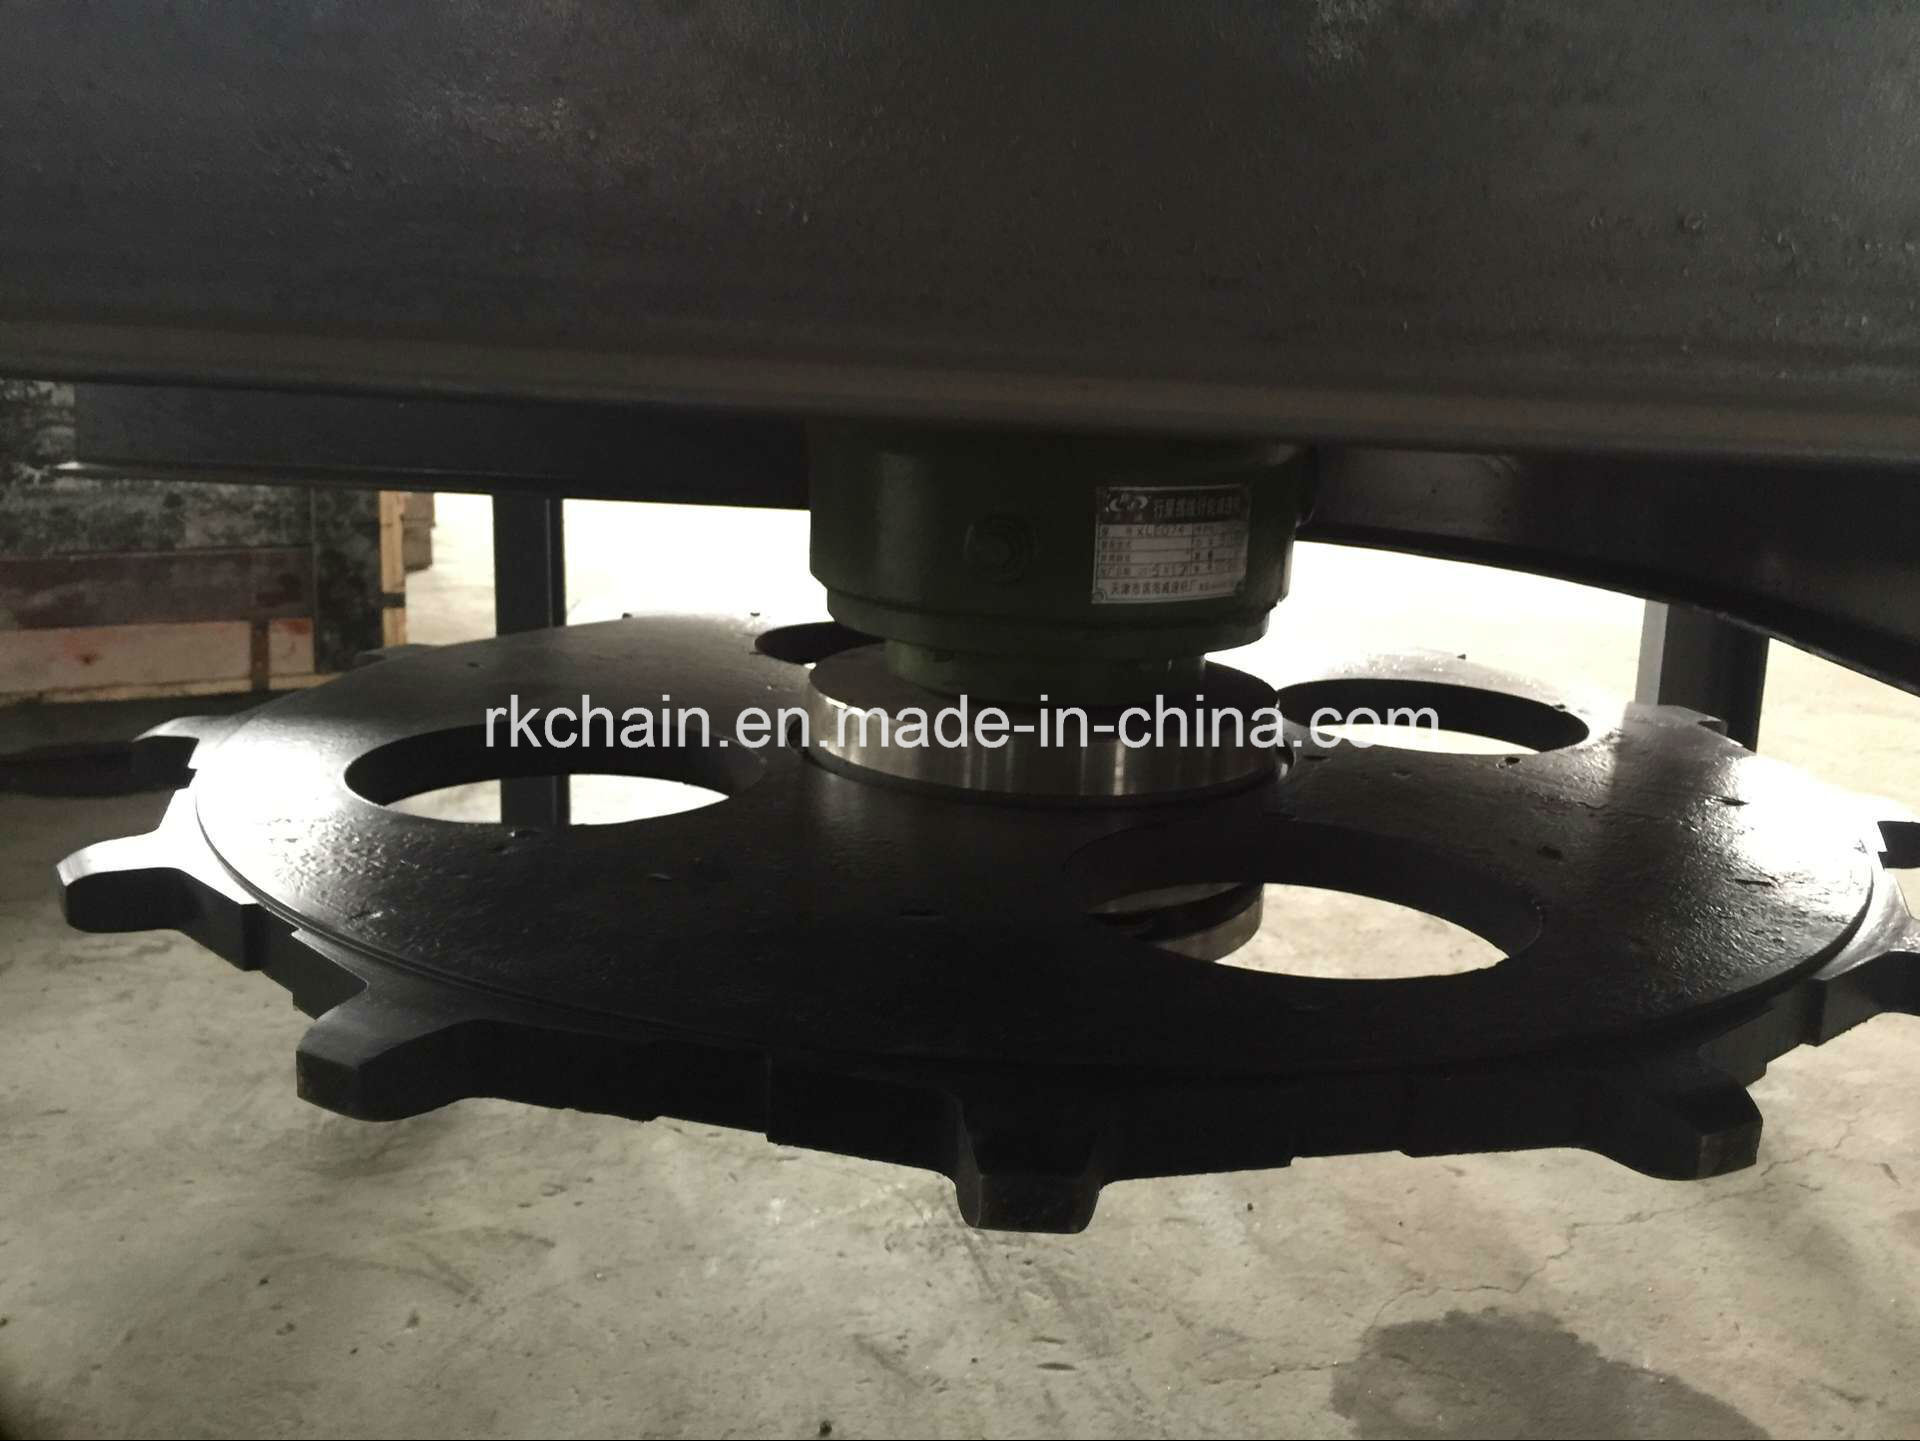 Chain Sprocket for Forged Conveyor Chain (X348, X458, X678, X698)